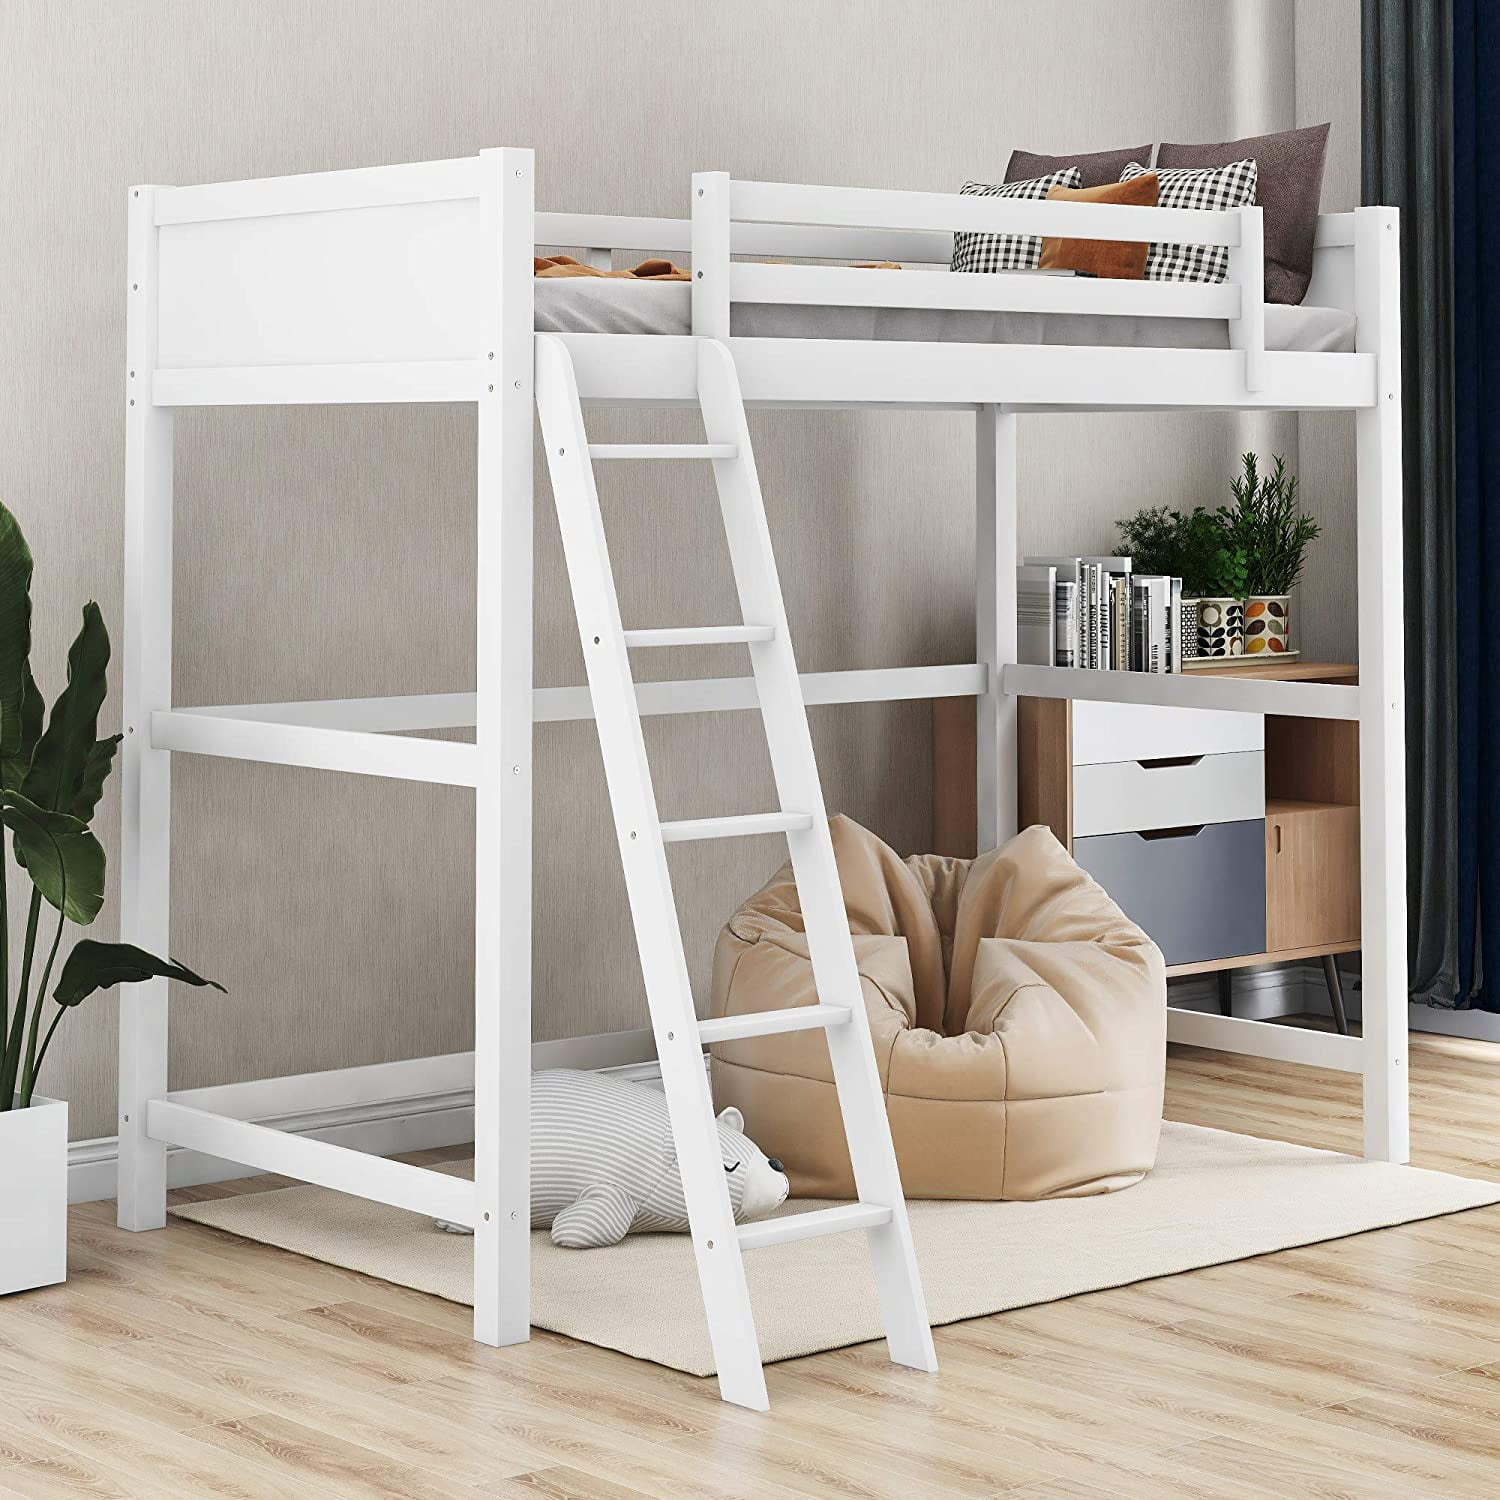 Churanty Twin Size Loft Bed With Ladder, Metal Bunk Bed Ladder Hurts Feet